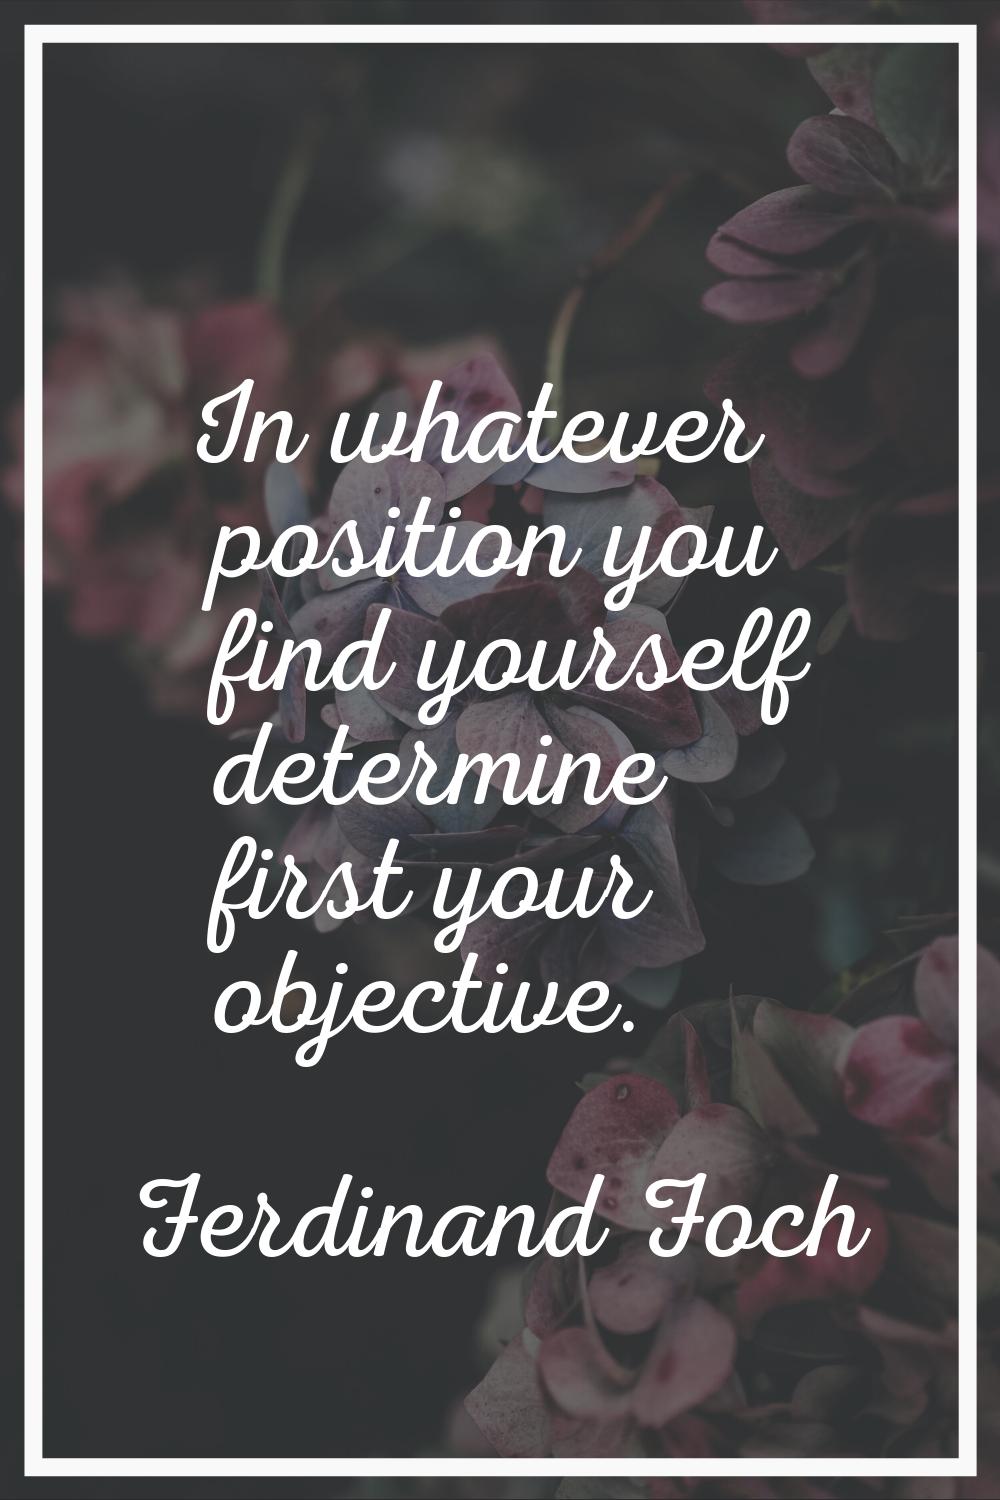 In whatever position you find yourself determine first your objective.